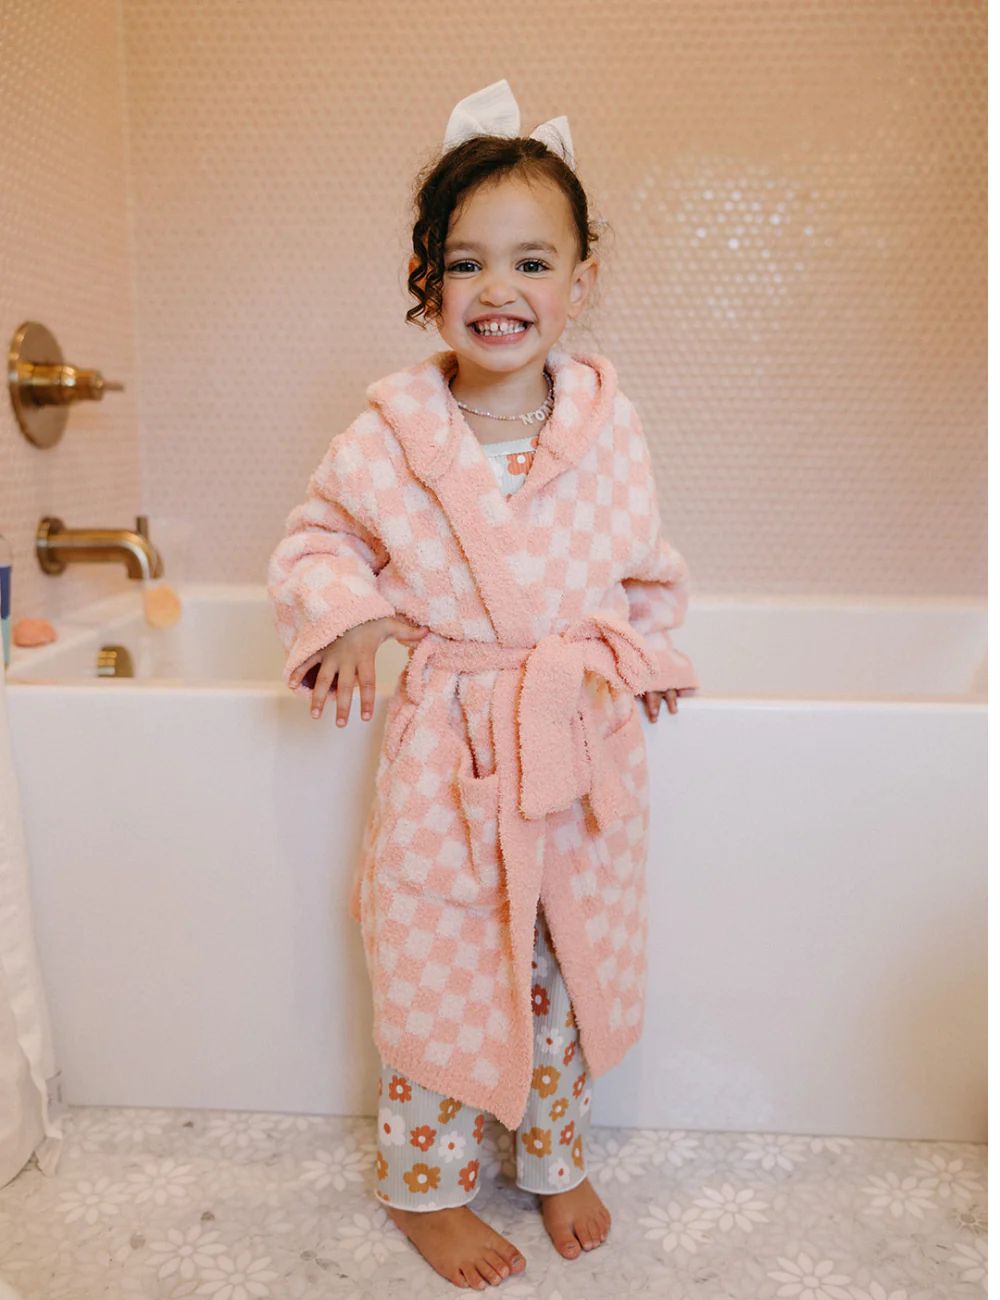 TSC x Madi Nelson: Family Checkered Robes | The Styled Collection